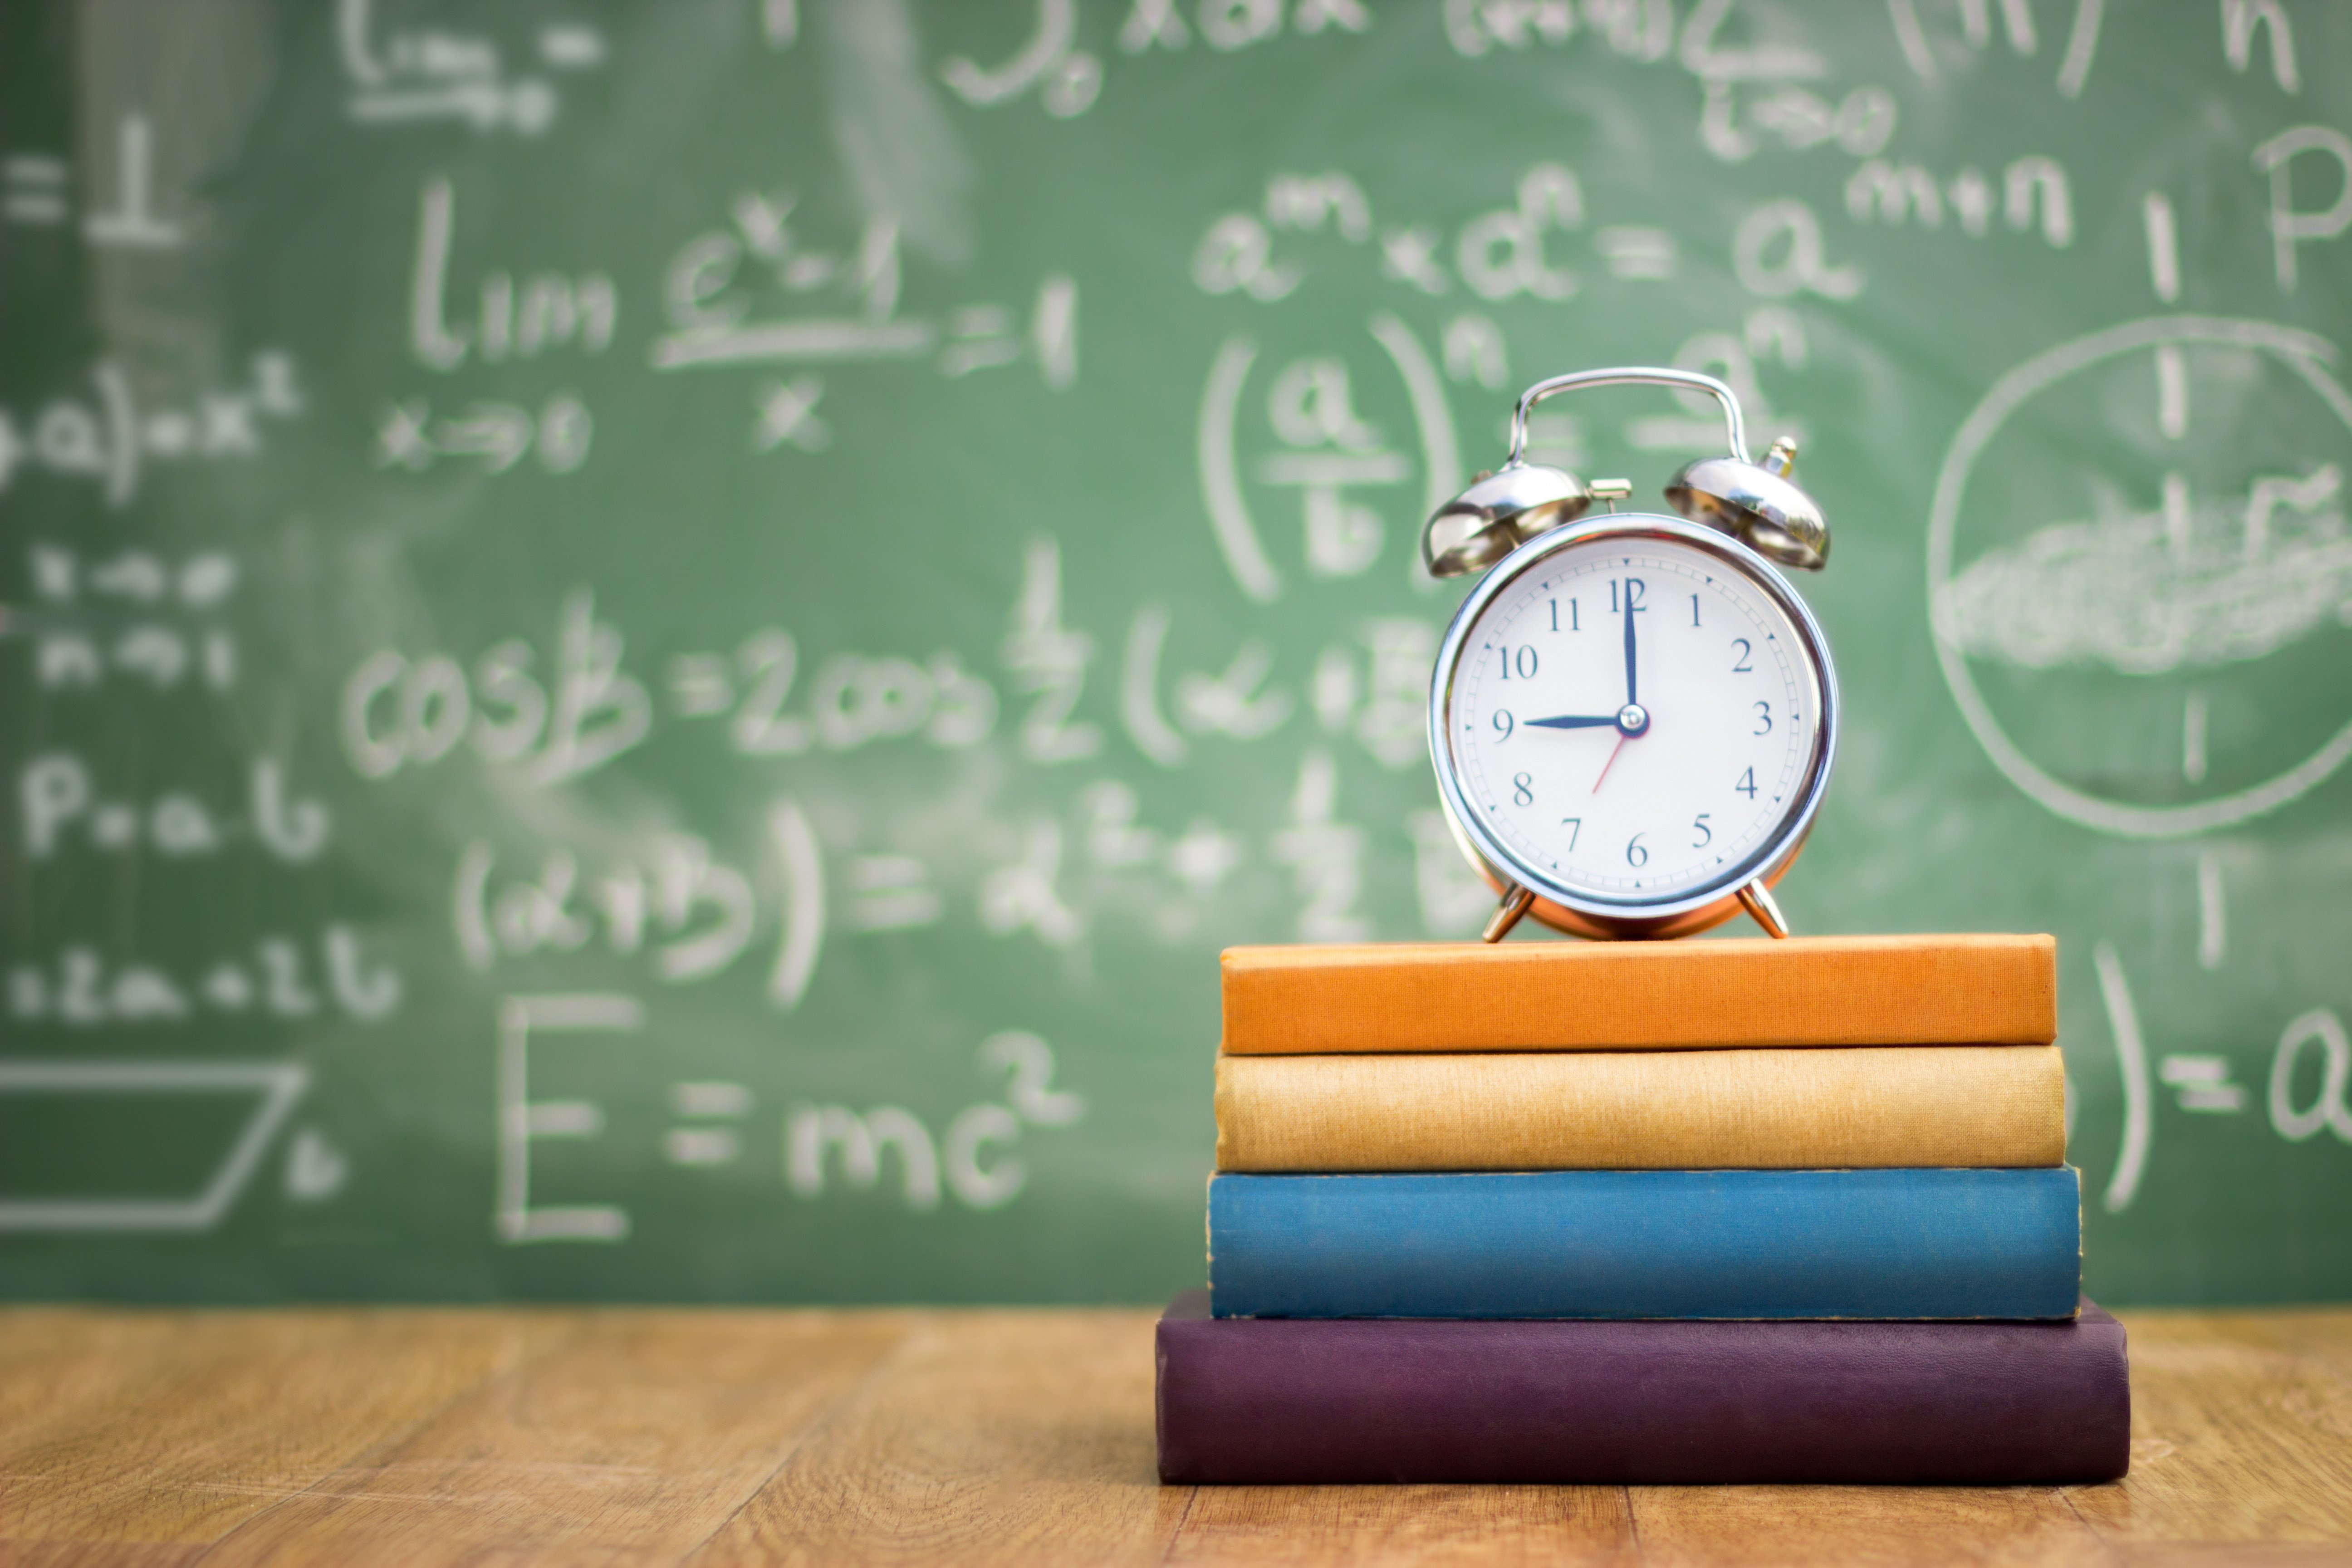 an image of a clock sitting on books in front of a classroom represents flexible learning.